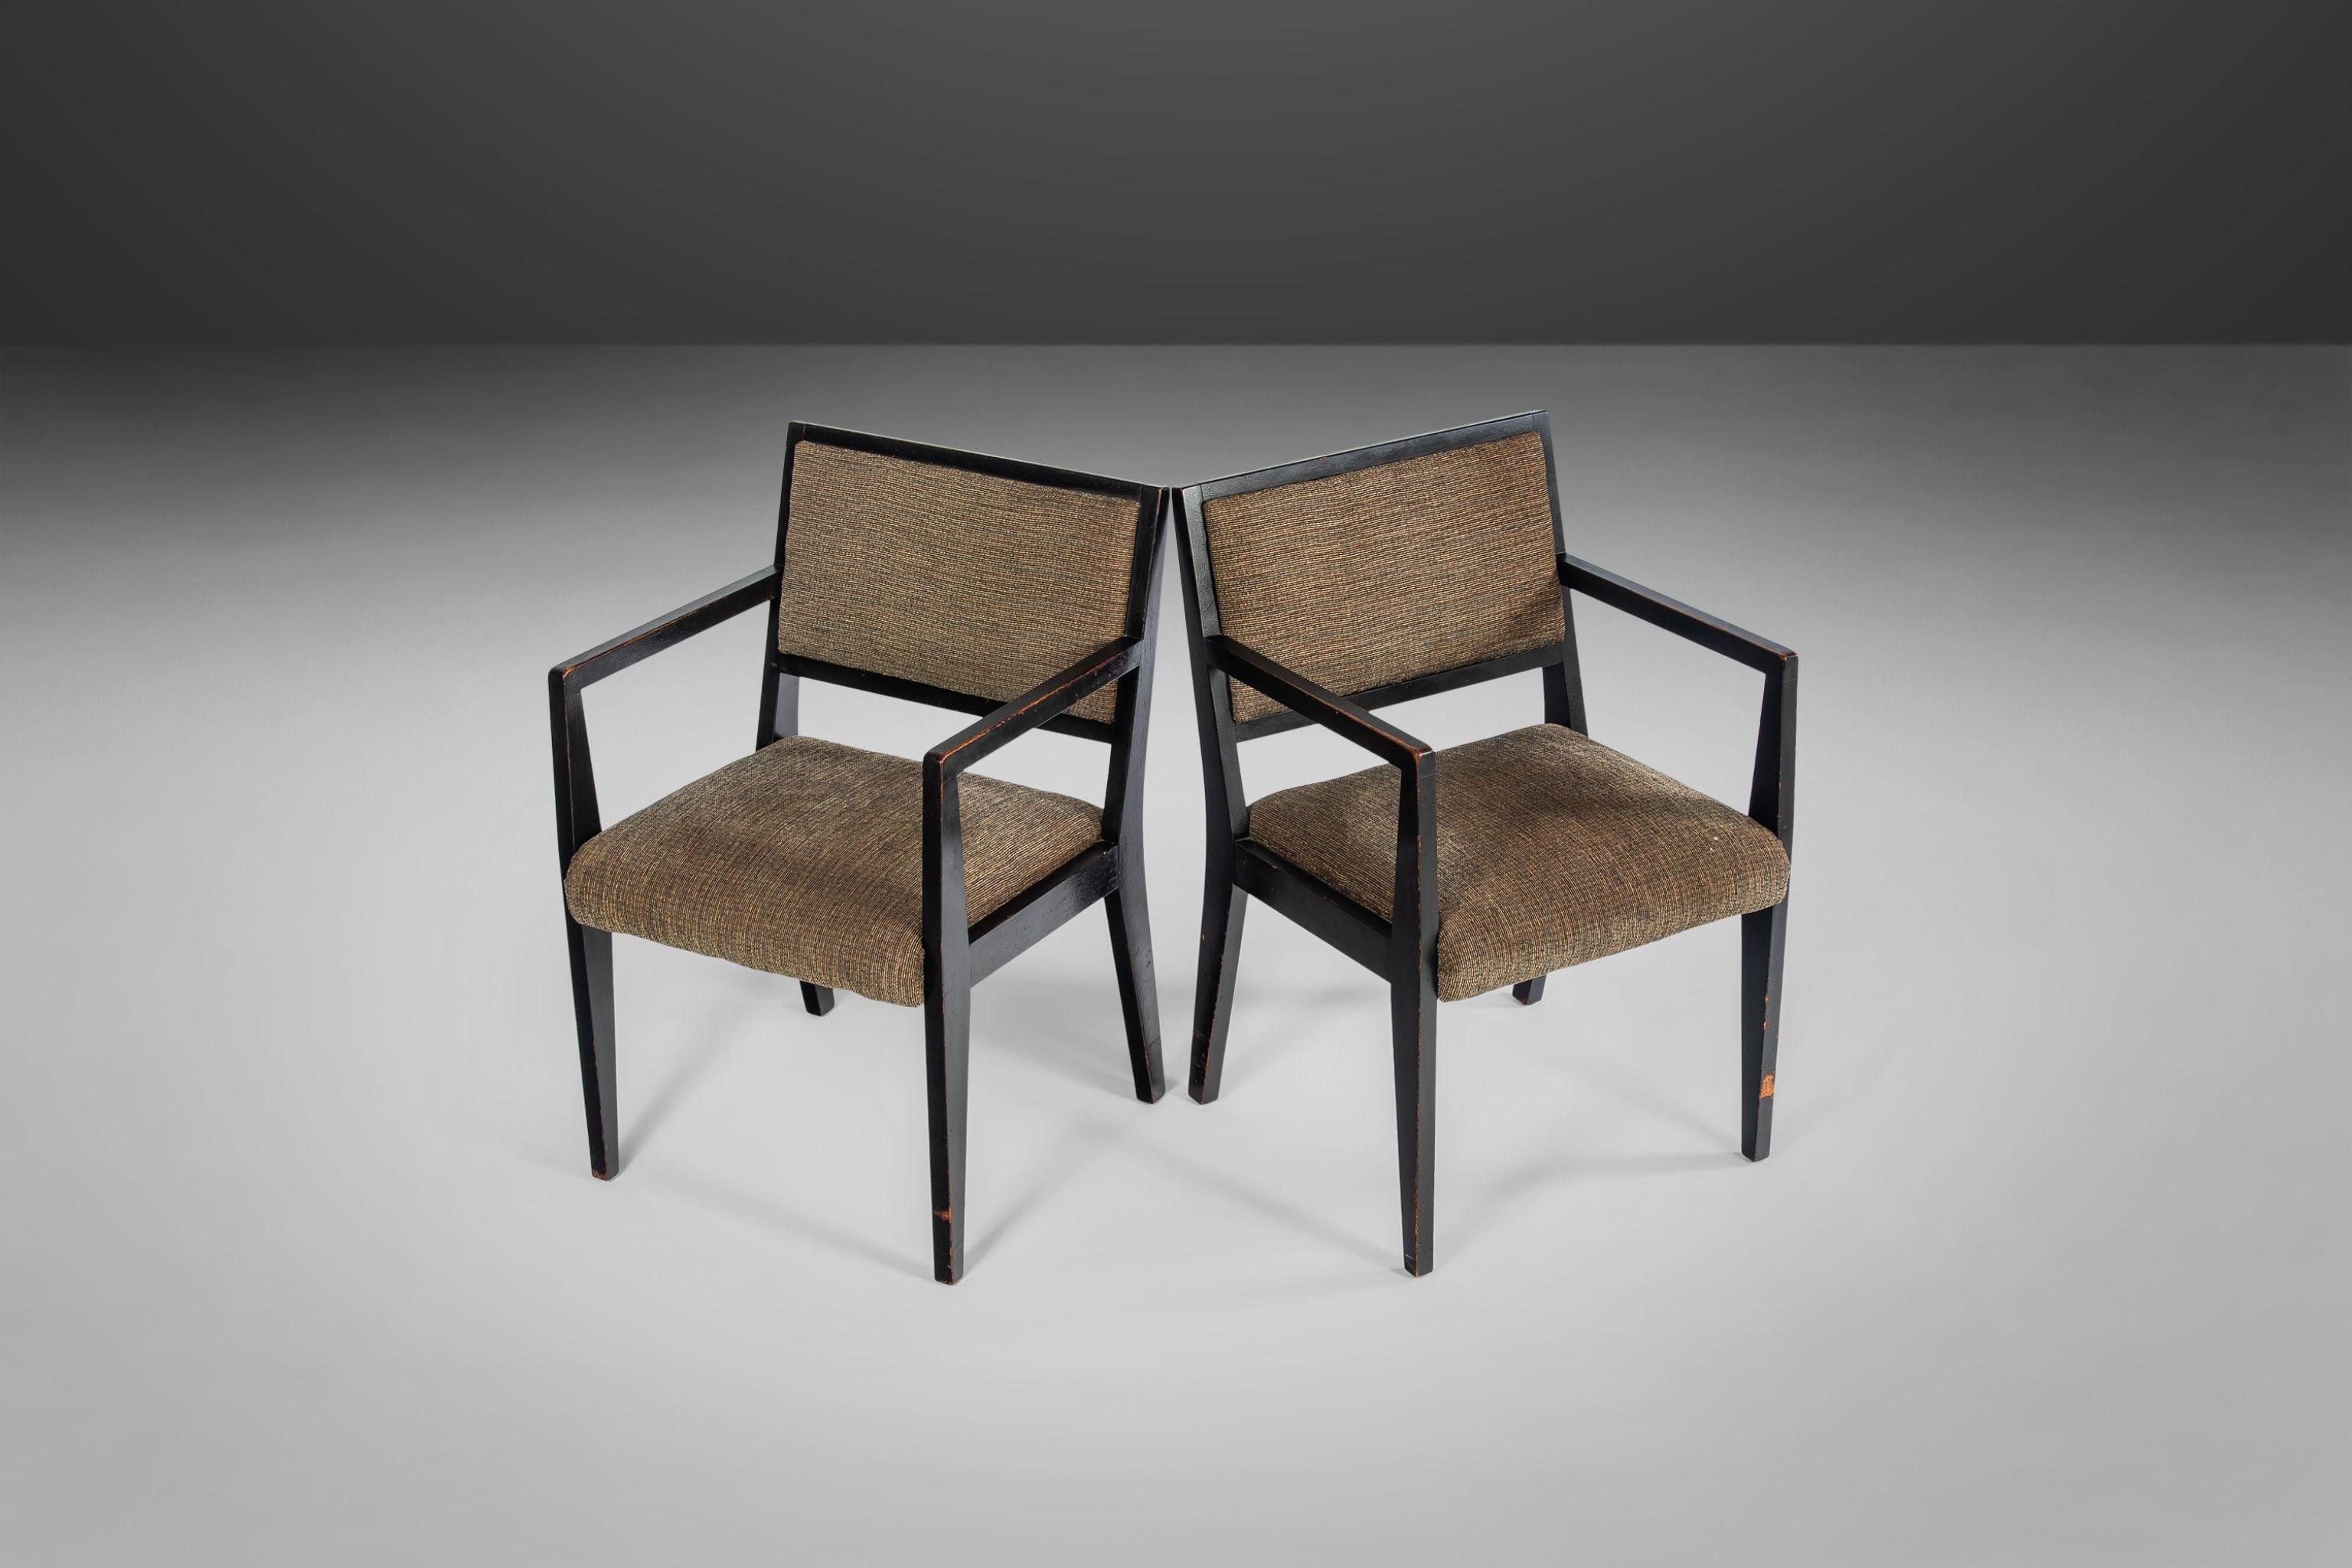 Set of 2 Patinaed Armchairs After Edward Wormley for Dunbar Chairs, USA, c. 1960 For Sale 11